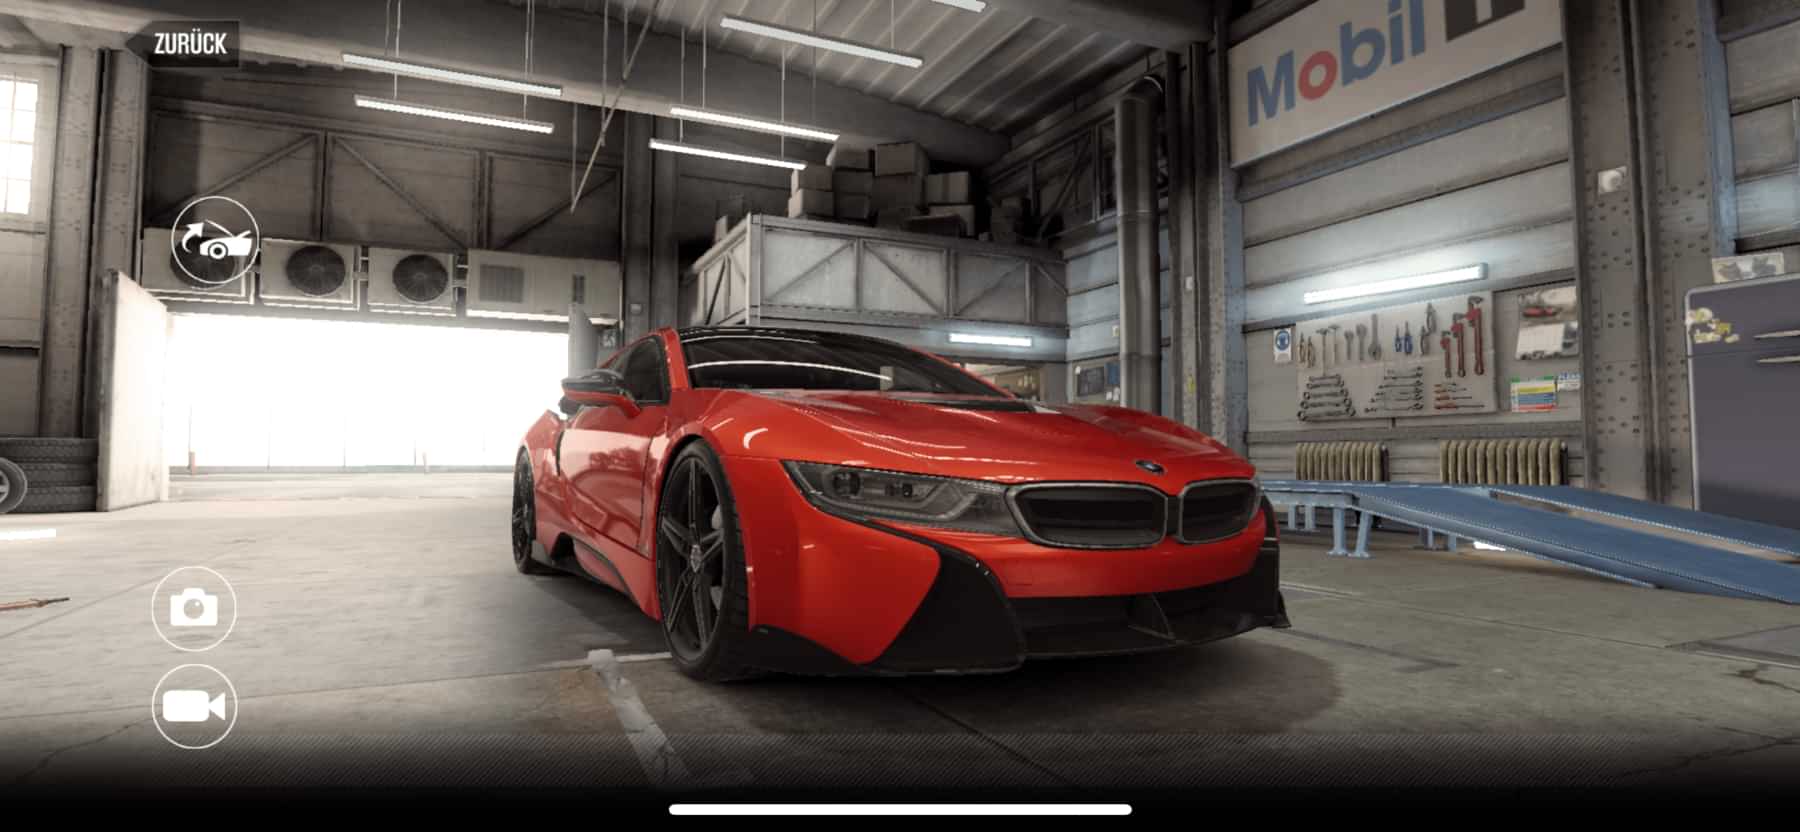 BMW ACS8 CSR2, best tune and shift pattern